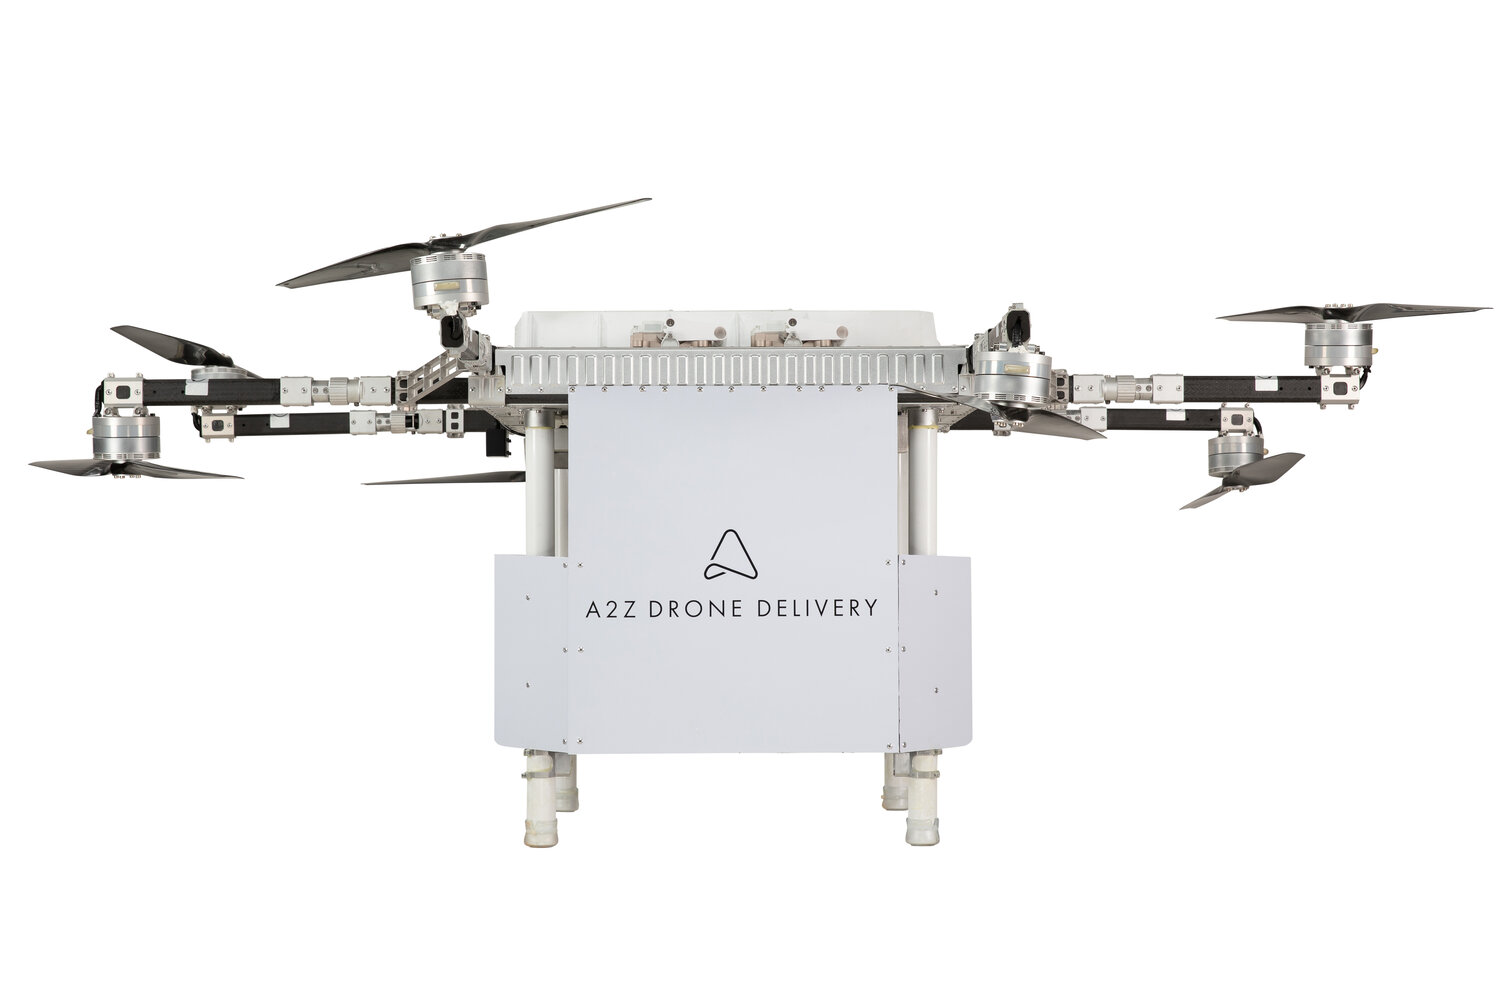 RDSX from A2Z Drone Delivery